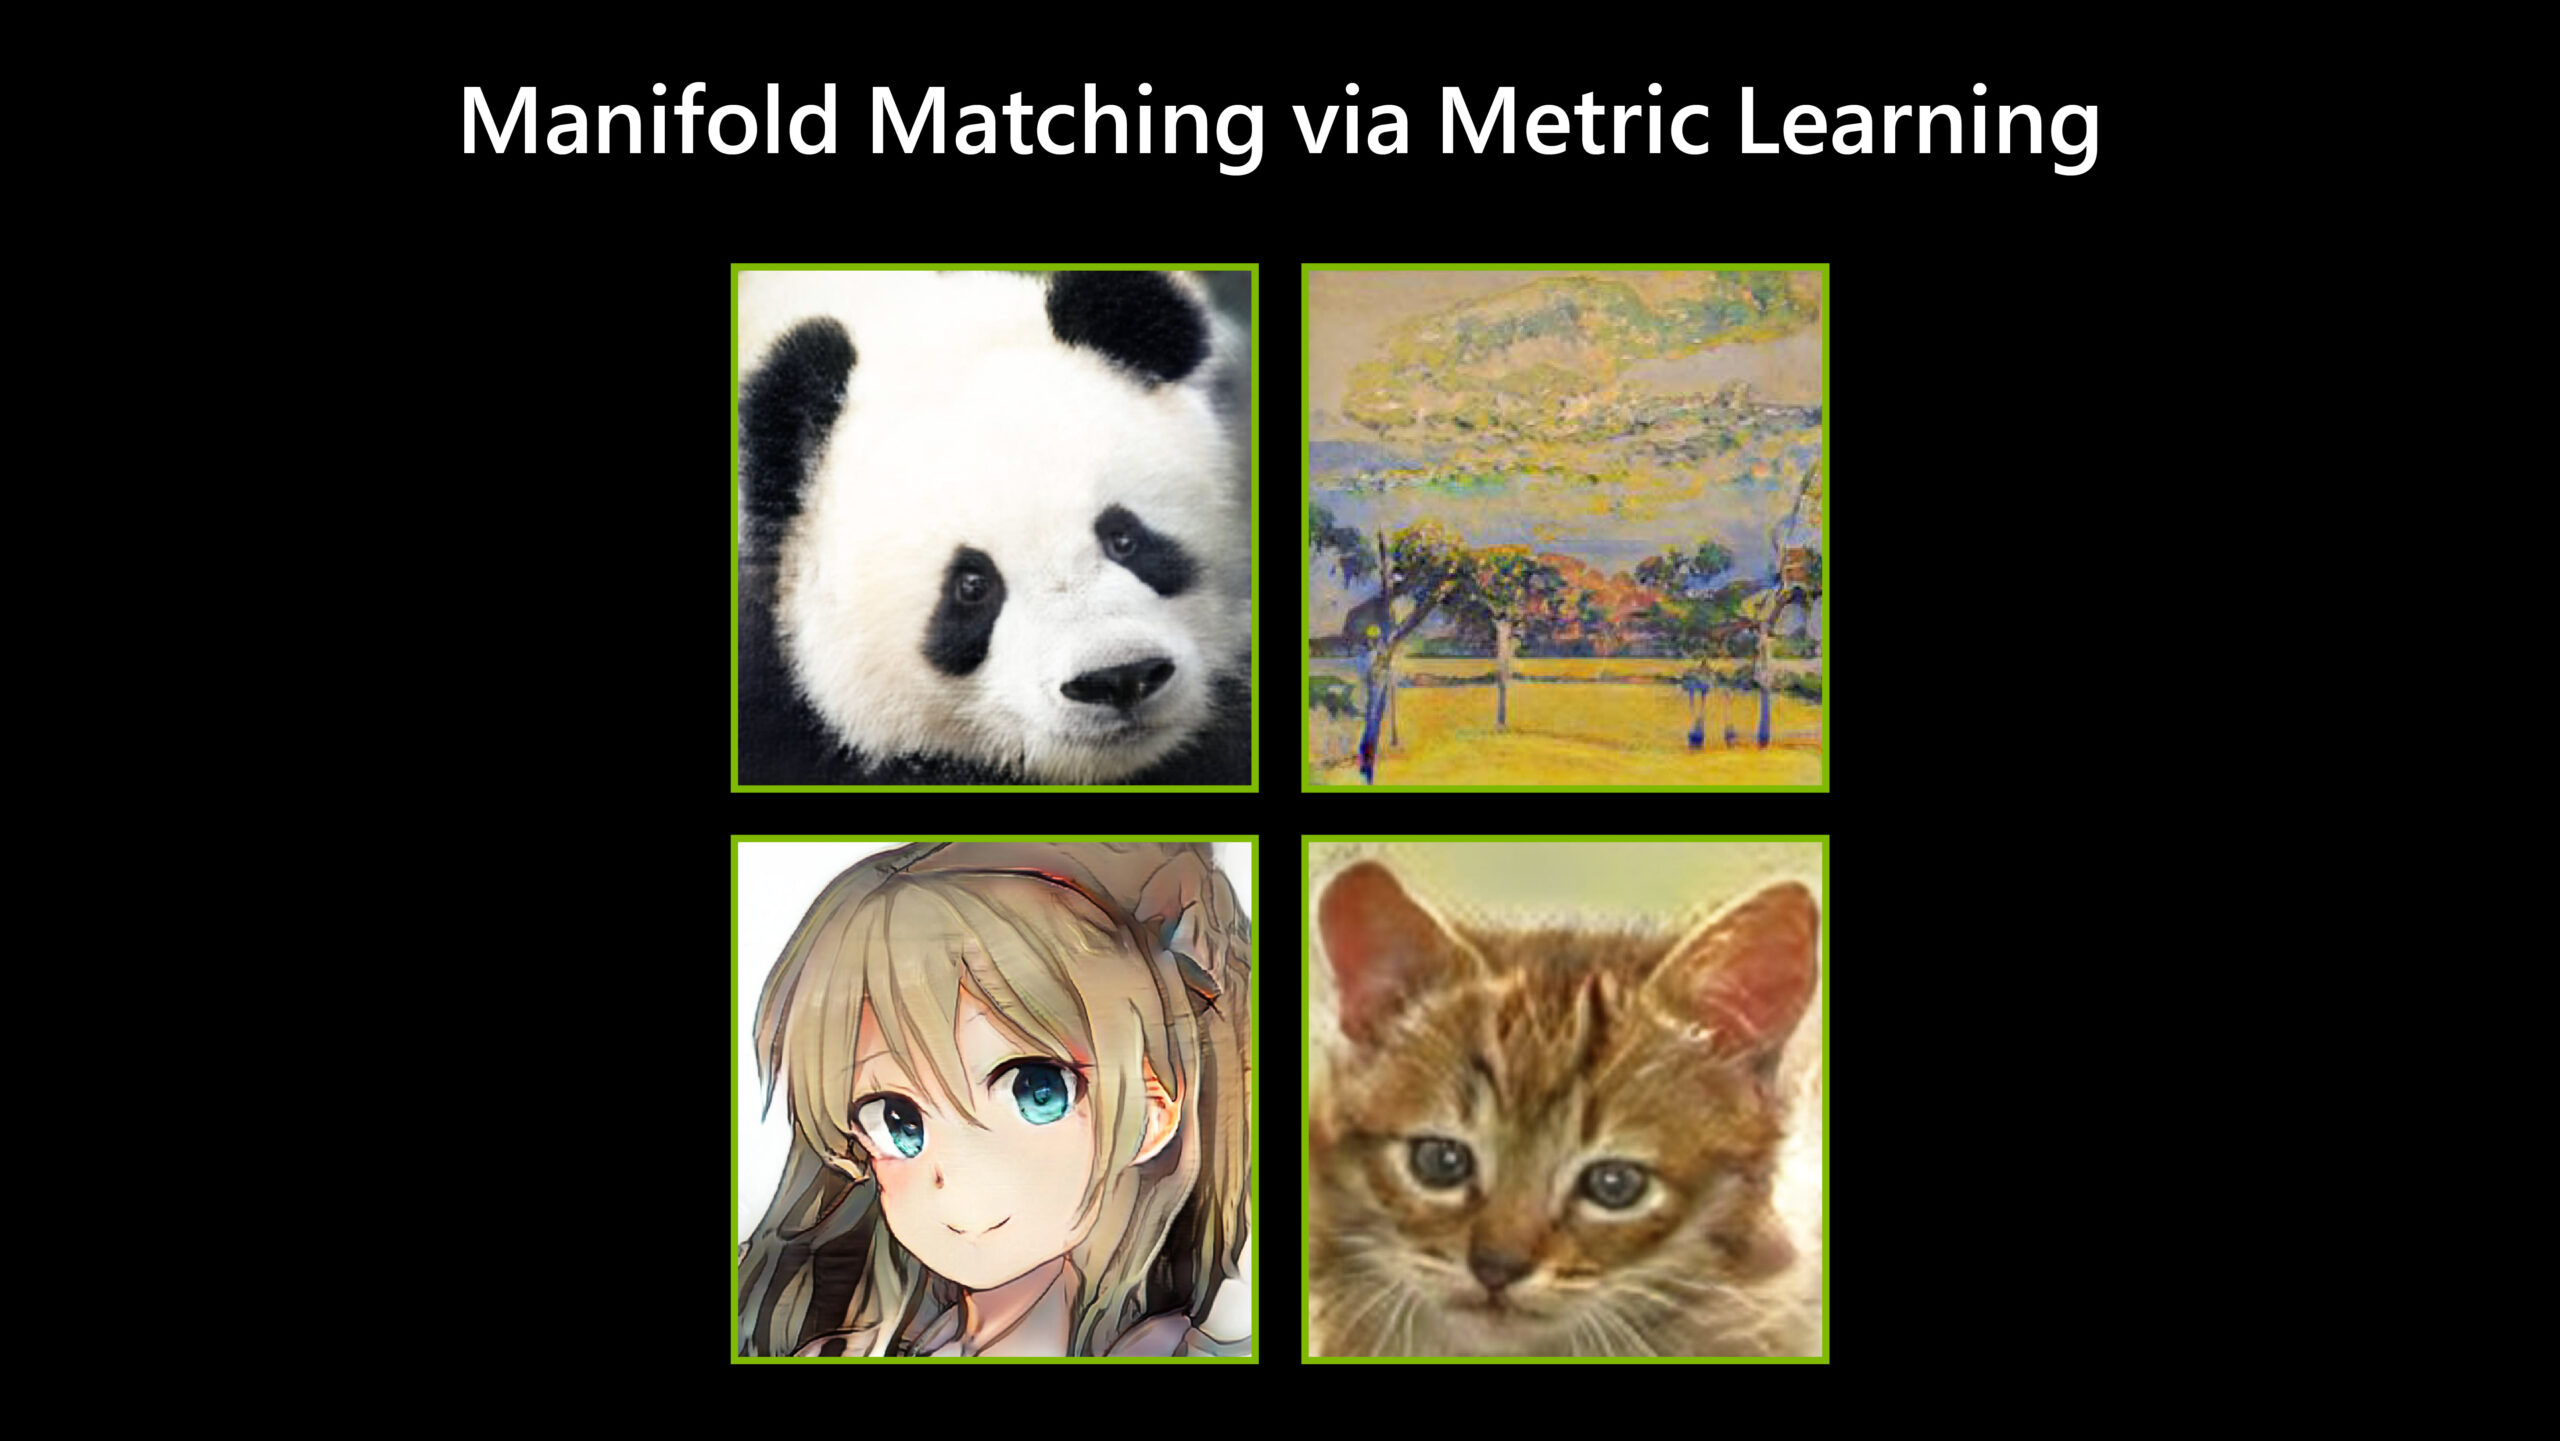 An image generation model training using MVM. Images show a panda progressively being generated to become more realistic, various paintings generated by the model, an anime character generated to become more realistic, and various cat images generated to become more realistic.